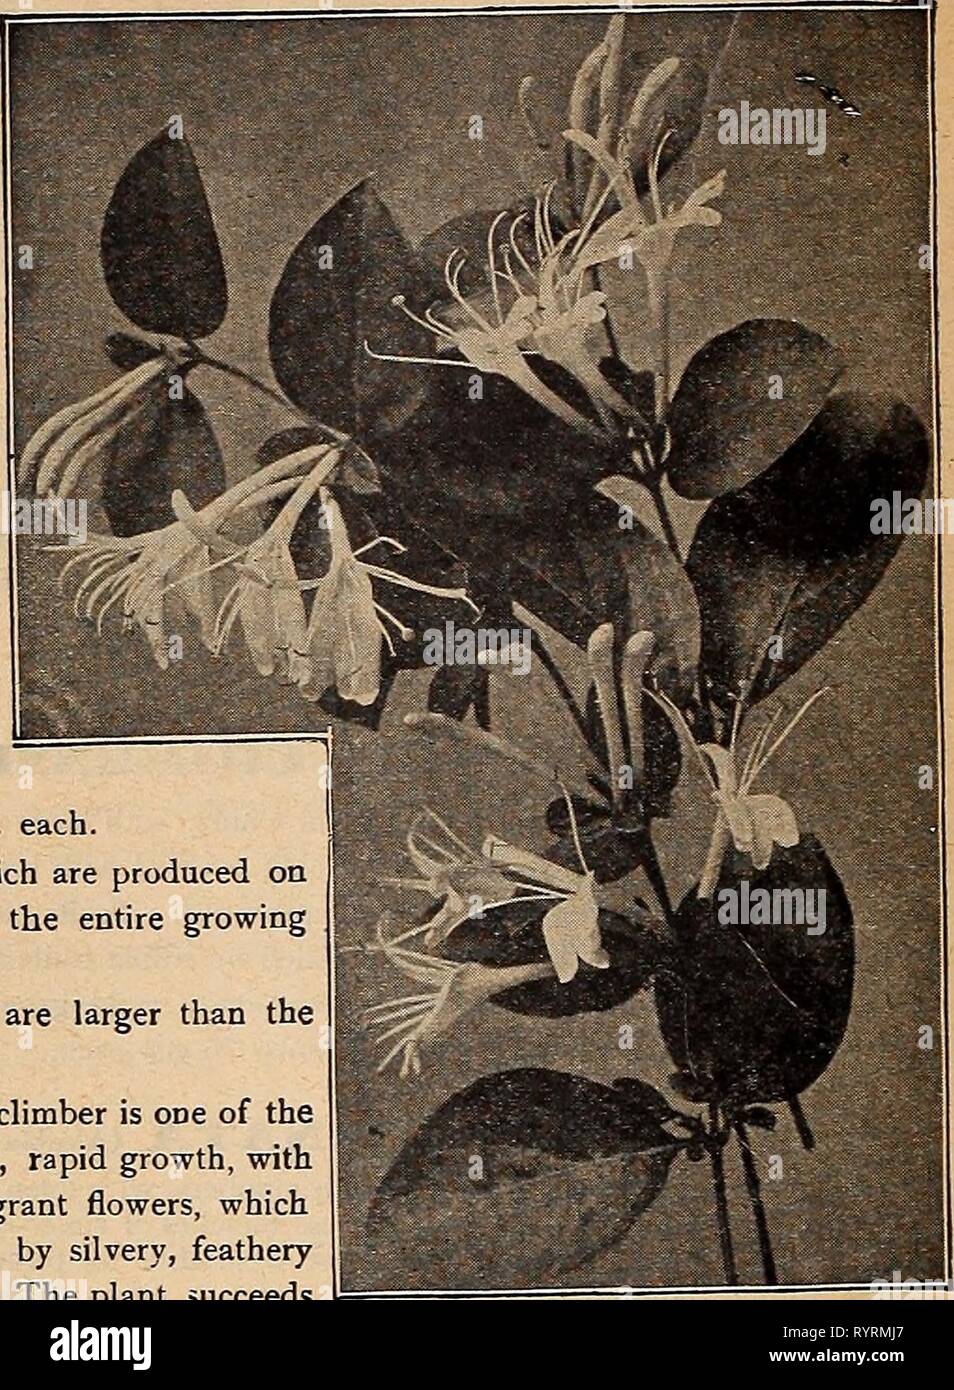 Dreer's mid-summer list 1917 (1917) Dreer's mid-summer list 1917 . dreersmidsummerl1917henr Year: 1917  38 HENRY A. DREER, PHILADELPHIA—HARDY CLIMBERS HARDY CI.EMATIS. Coccinea. Handsome bell-shaped flowers of a bright coral-red color from June until frost. 25 cts. each; $2.50 per doz. Crispa. Bears an abundance of pretty bell-shaped, fragrant, lav- ender flowers, with white centre, from June until frost. 25 cts. each; $2.50 per doz. Montana Qrandiflora, Of stronger growth than any other Clematis, and succeeds under the most adverse conditions, and is perfectly hardy. Its flowers, which resemb Stock Photo